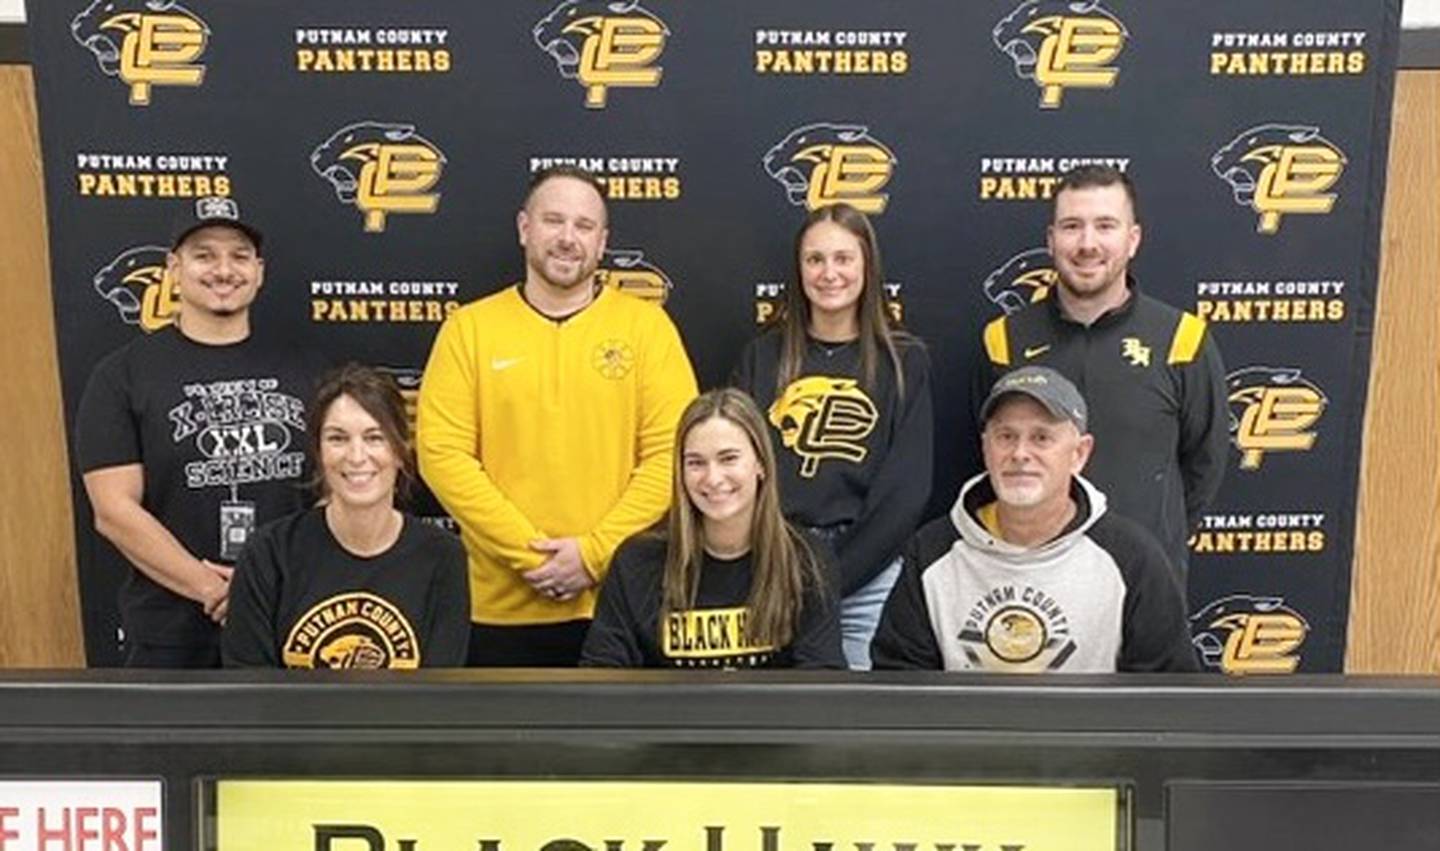 Putnam County senior Ava Hatton (front center) signed to play basketball for Black Hawk College. She was joined by her parents (front) row) Niki and Chuck Hatton; and (back row) Robbie Ramirez (trainer from Xercise Science), Jared Sale (PC coach, her sister, Presley, and Logan Frye (Black Hawk coach).